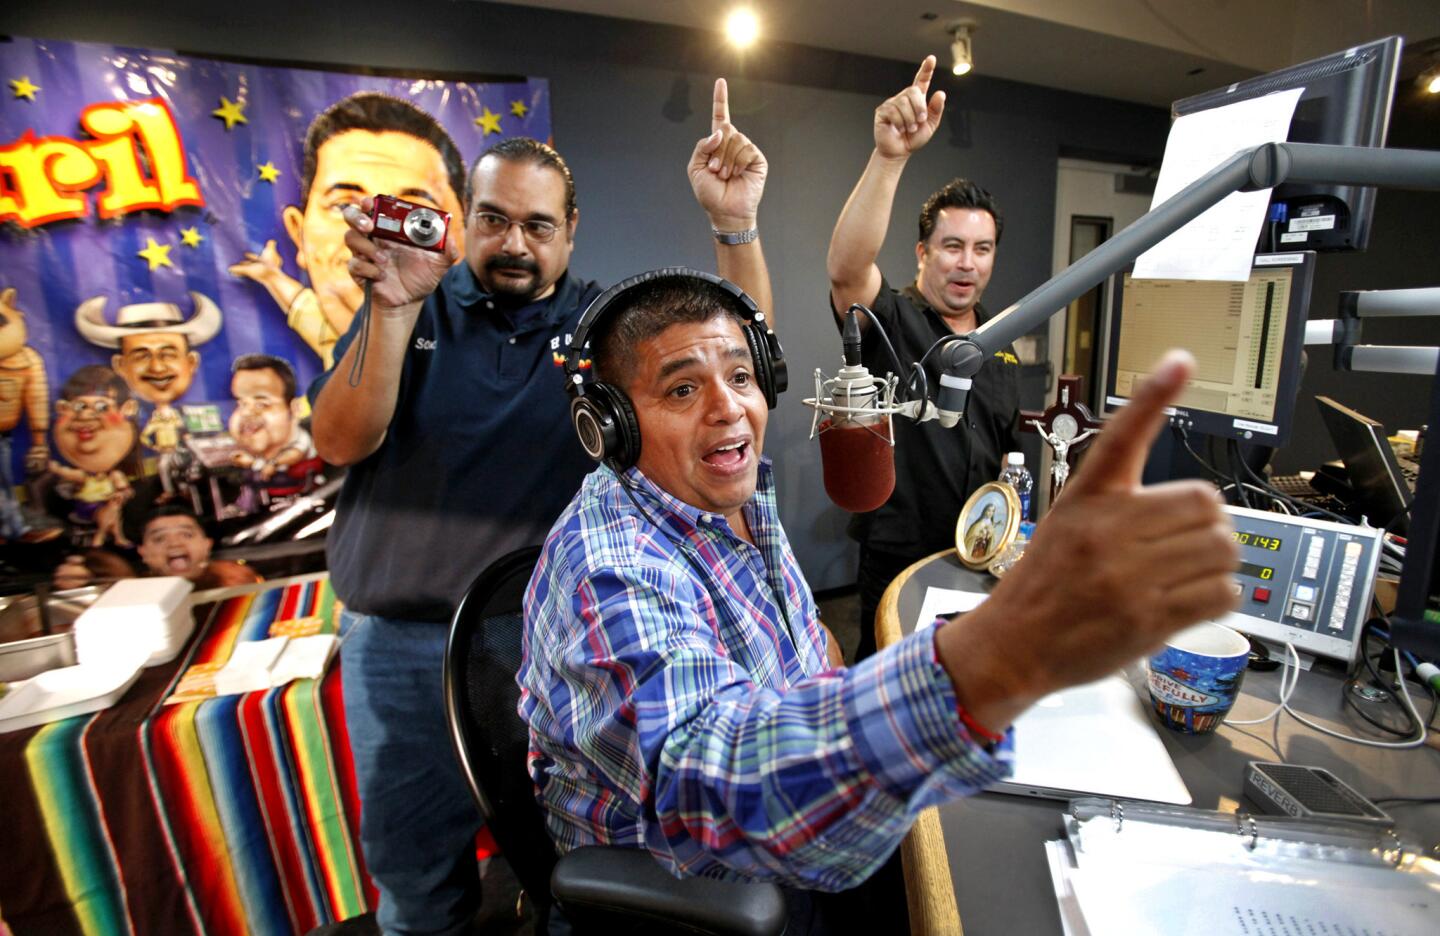 Ricardo "El Mandril" Sanchez, center, at the microphone at KLAX-FM (97.9) La Raza in Los Angeles. "I like him a lot. I've been around a lot of famous radio or TV folks, and some are more genuine than others," Mayor Eric Garcetti says. "He's as real as they get."